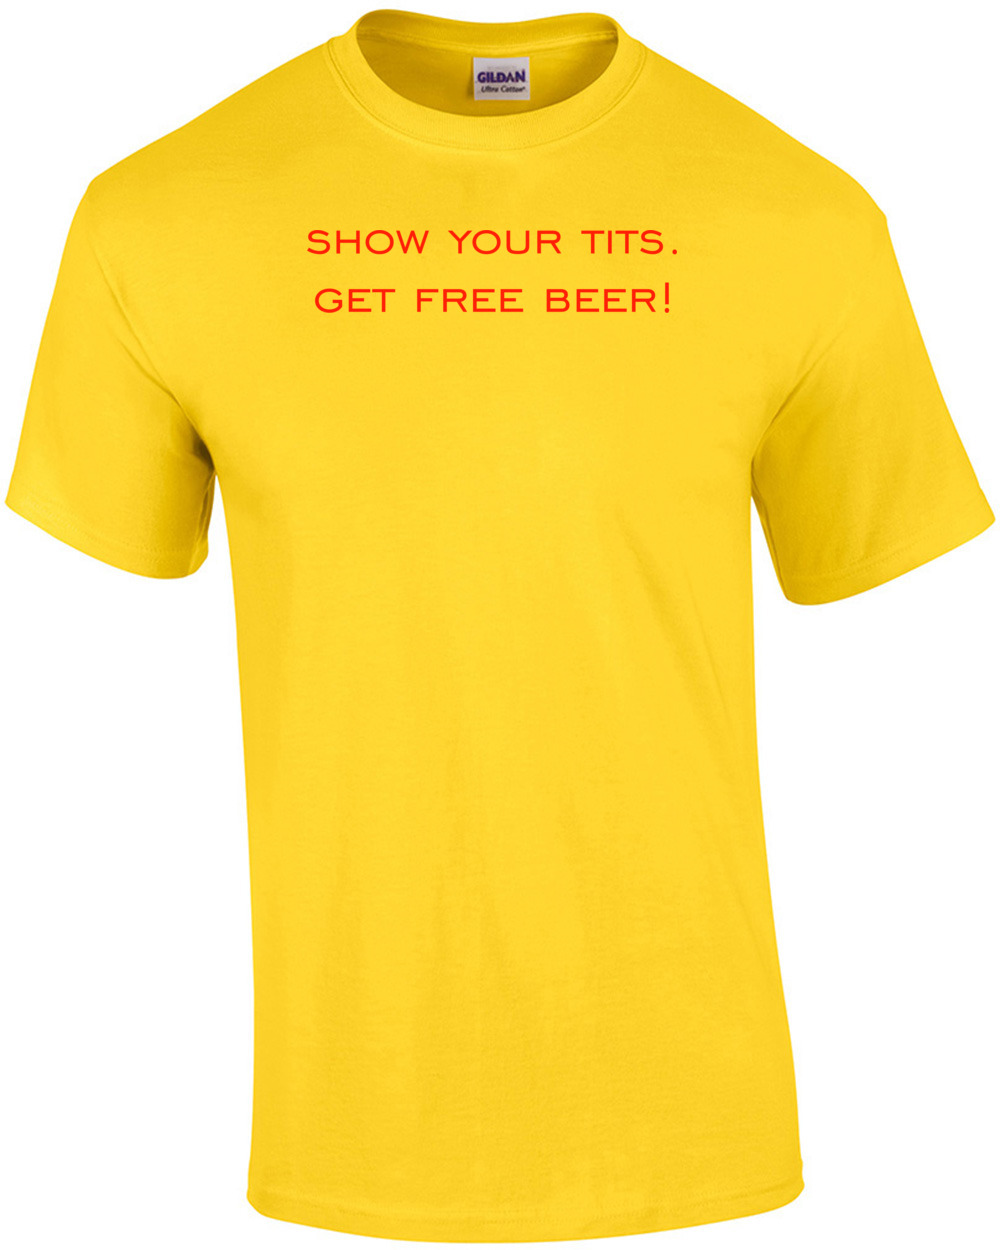 Show Your Tits Get Free Beer Shirt Ebay